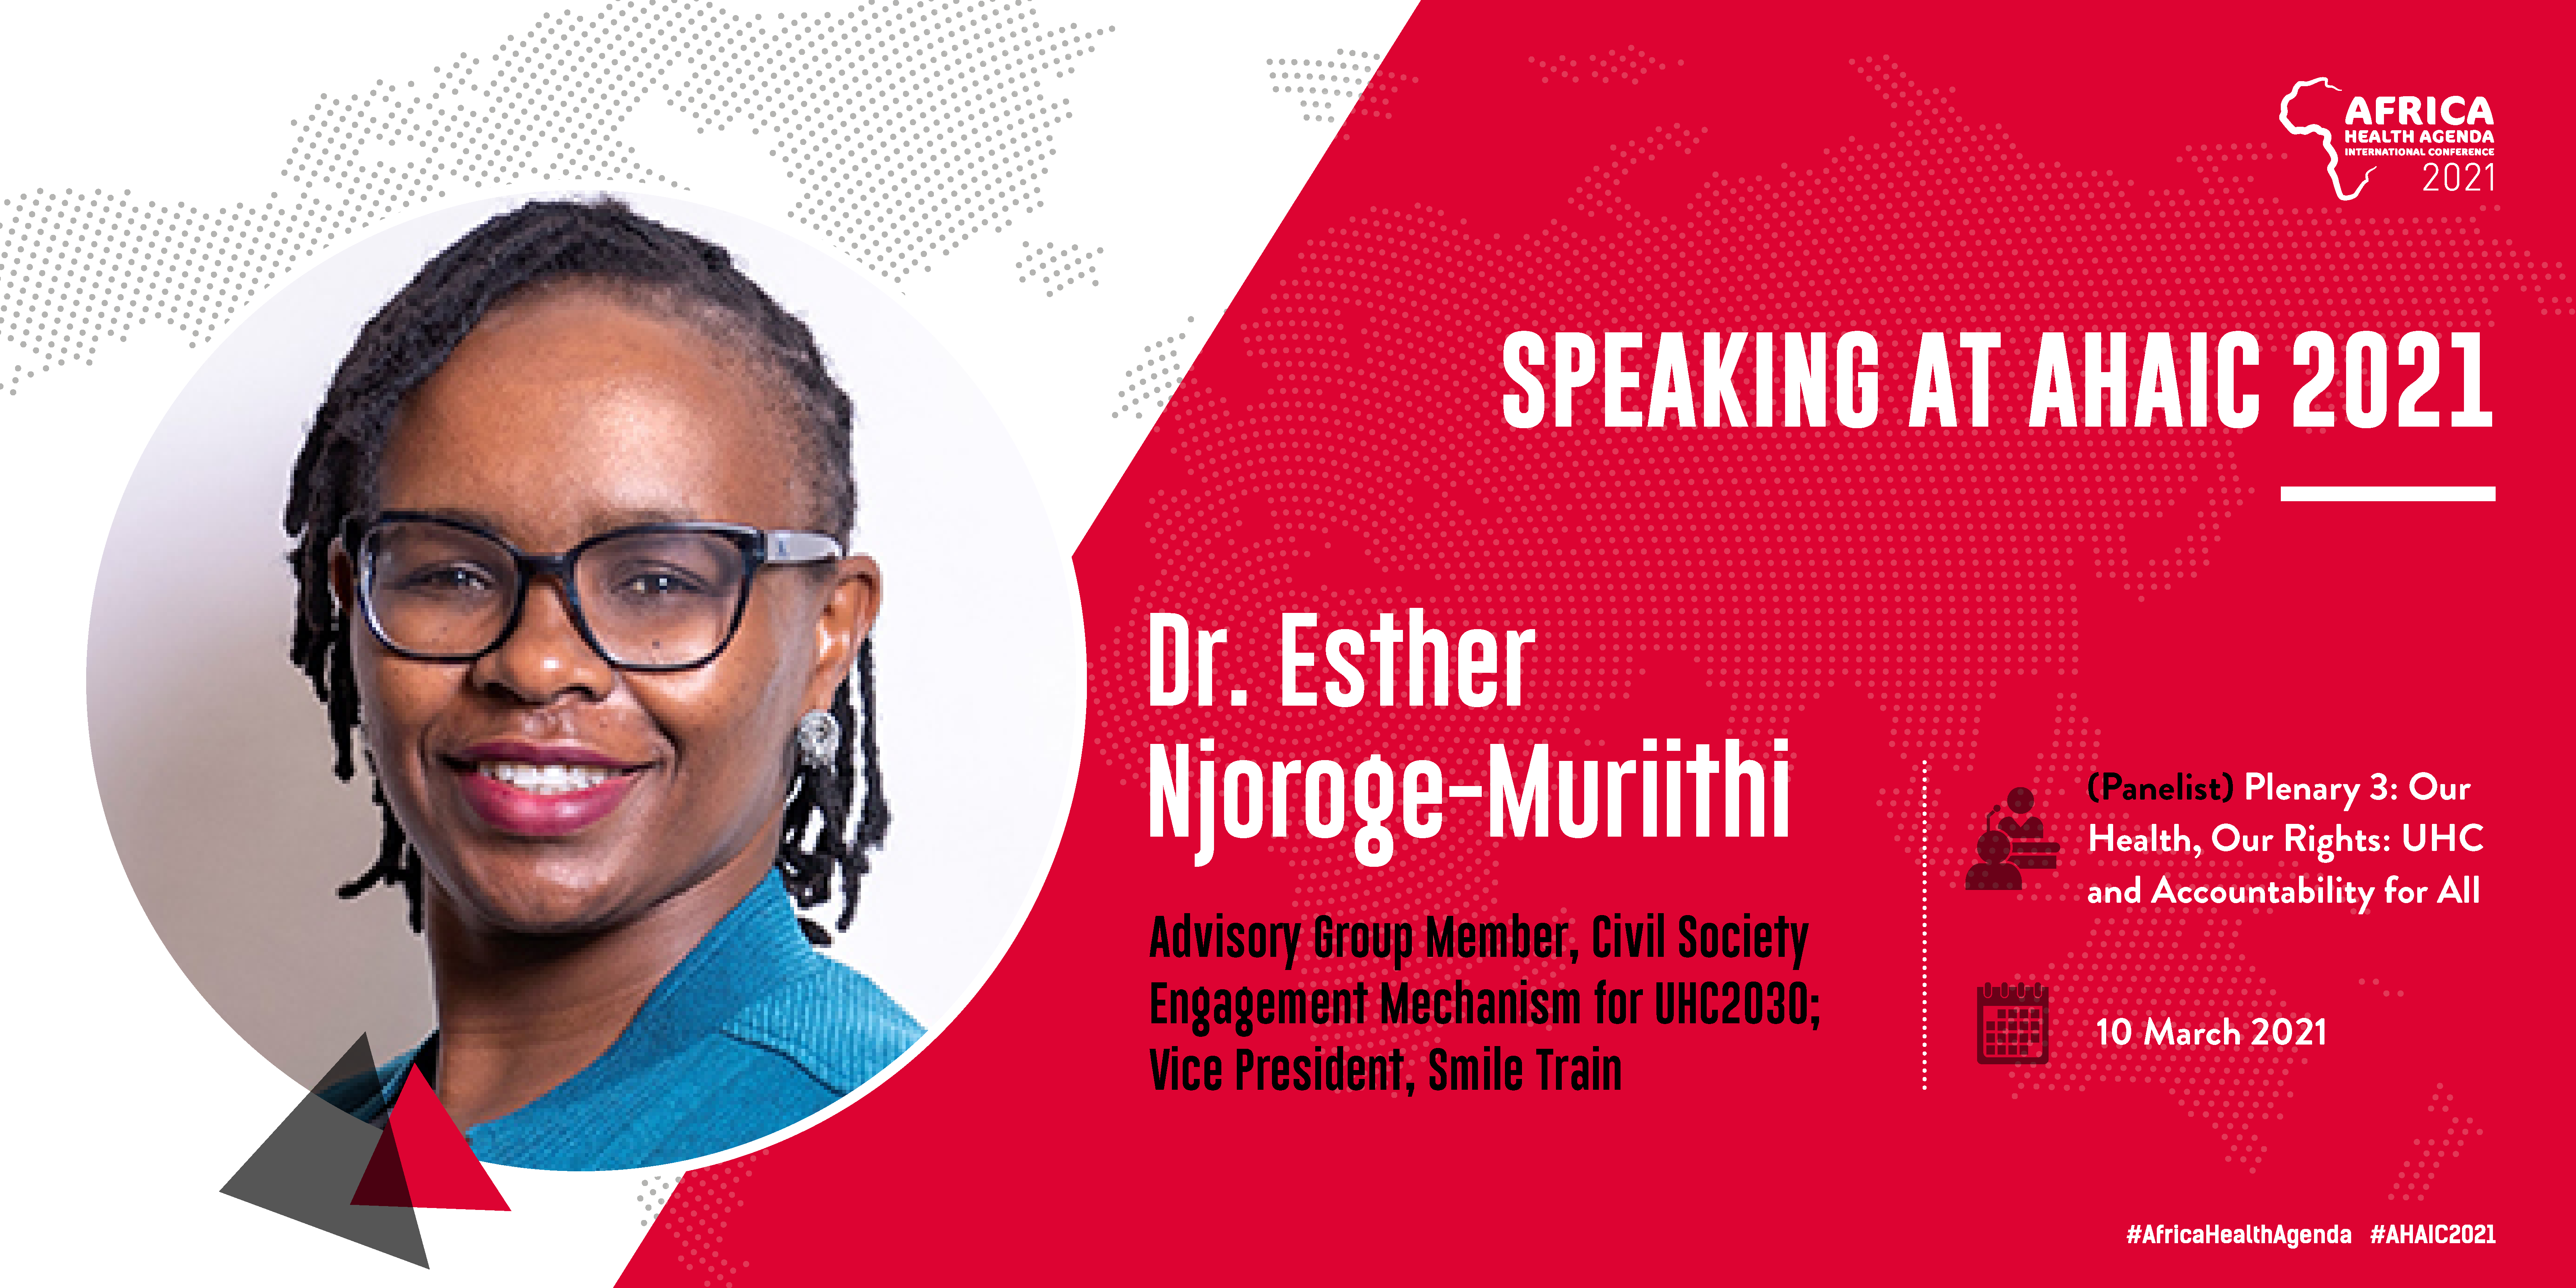 Dr Esther Njoroge-Muriithi - Speaking at AHAIC 2021 Conference